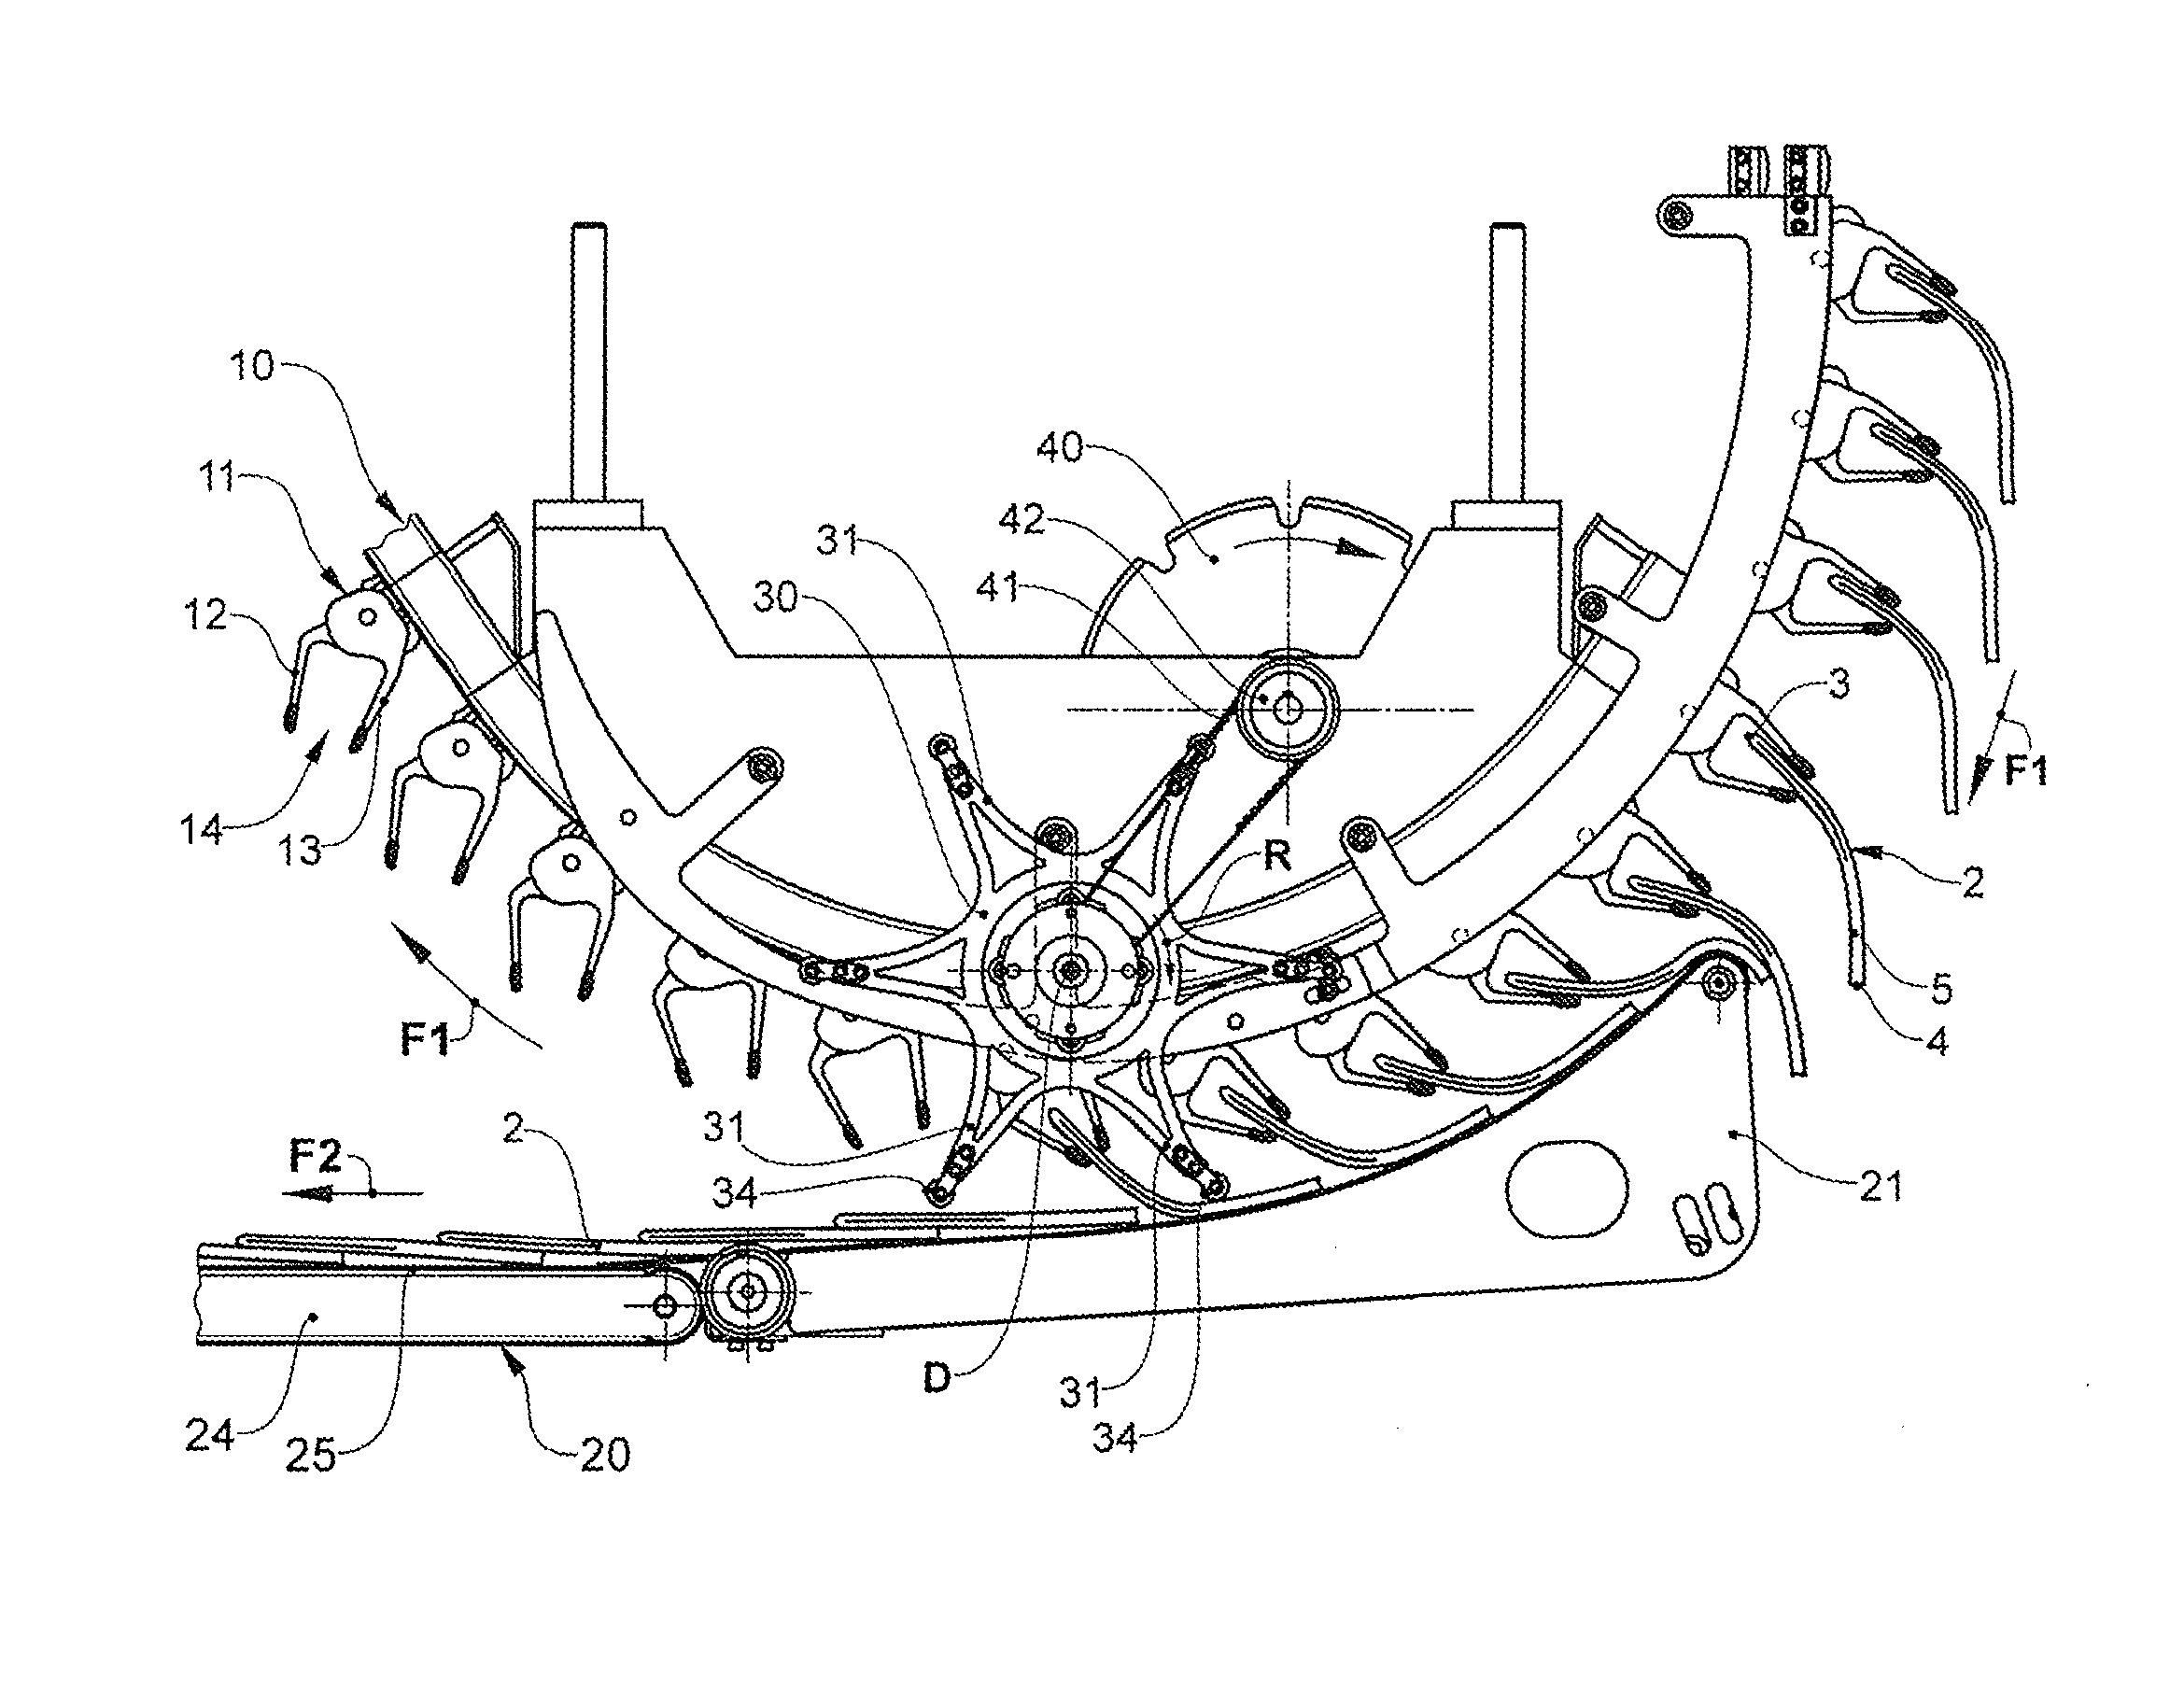 Device and method for conveying flat objects